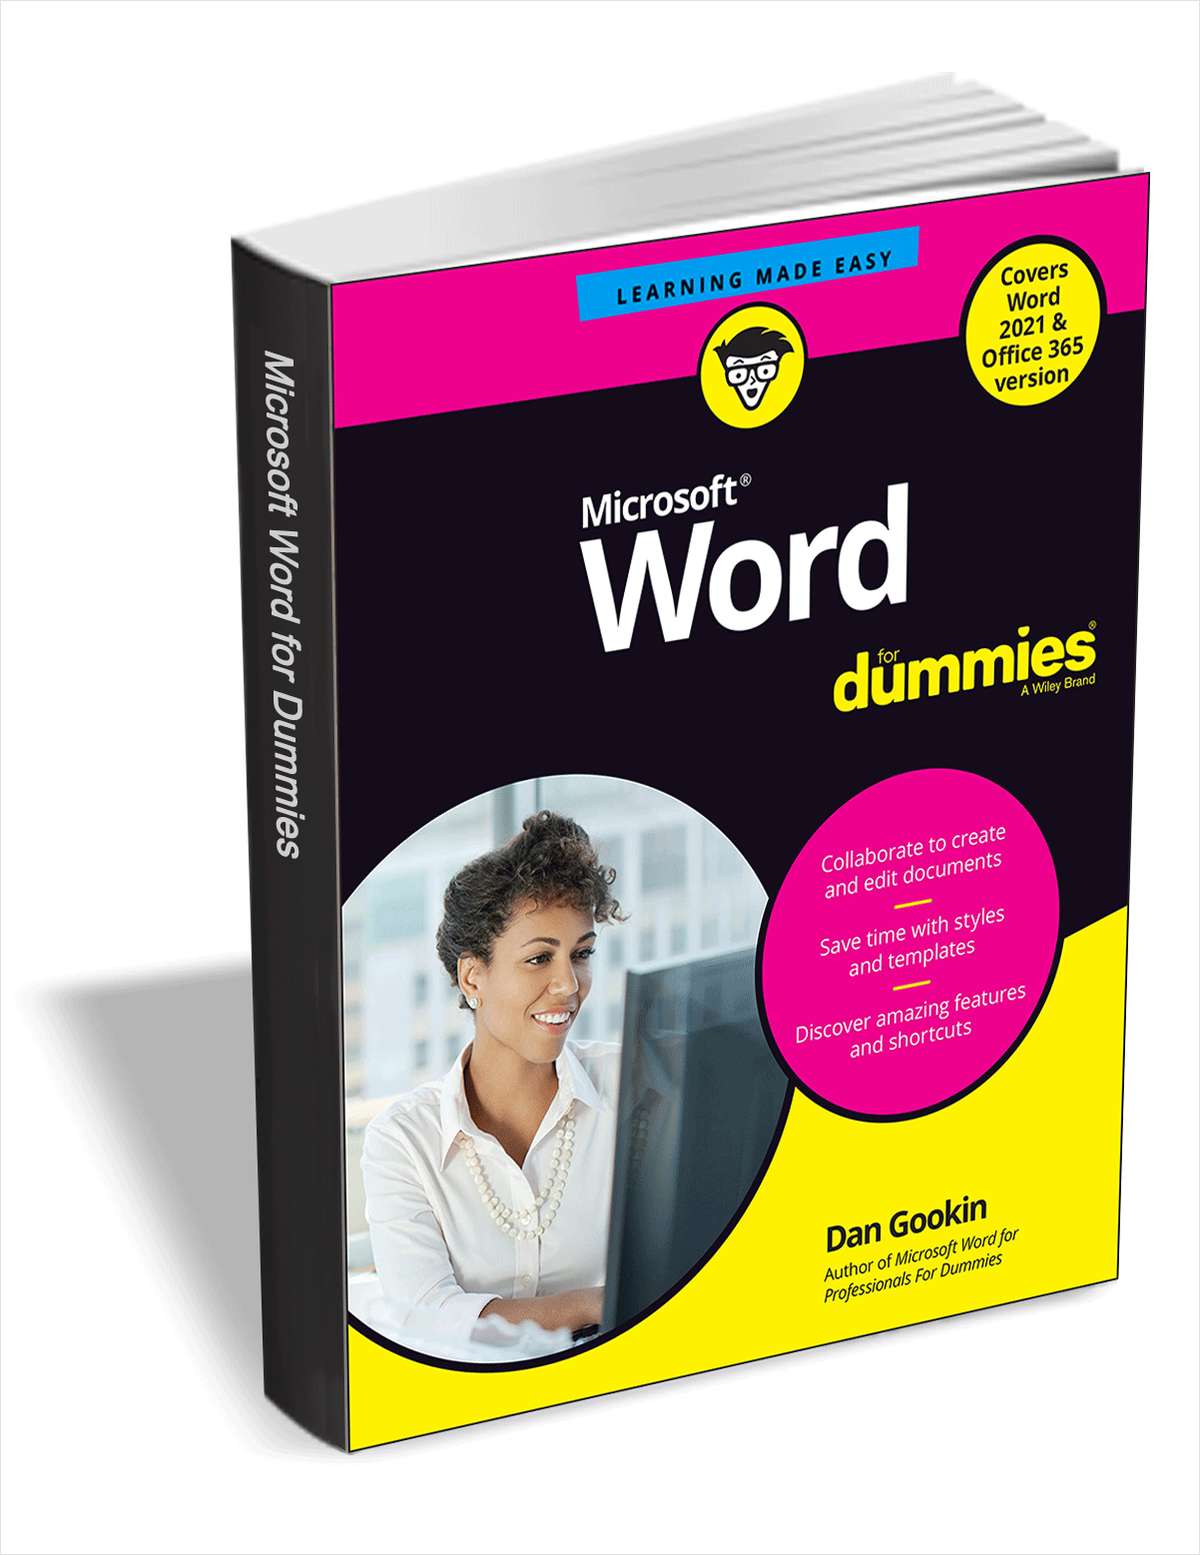 Get 'Microsoft Word For Dummies' (worth 18) for FREE